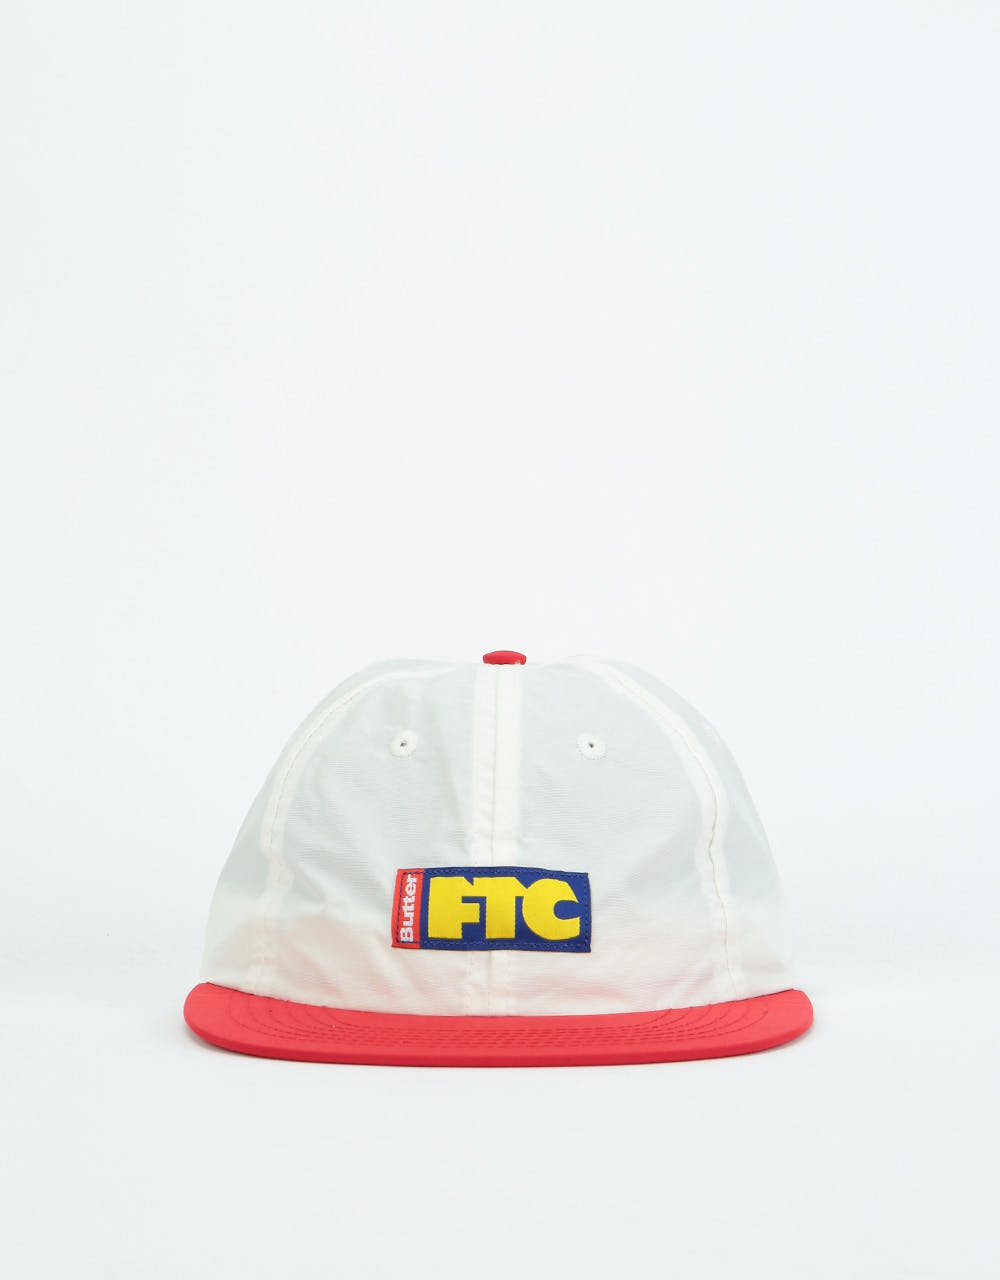 Butter Goods x FTC Flag 6 Panel Cap - Off White/Red